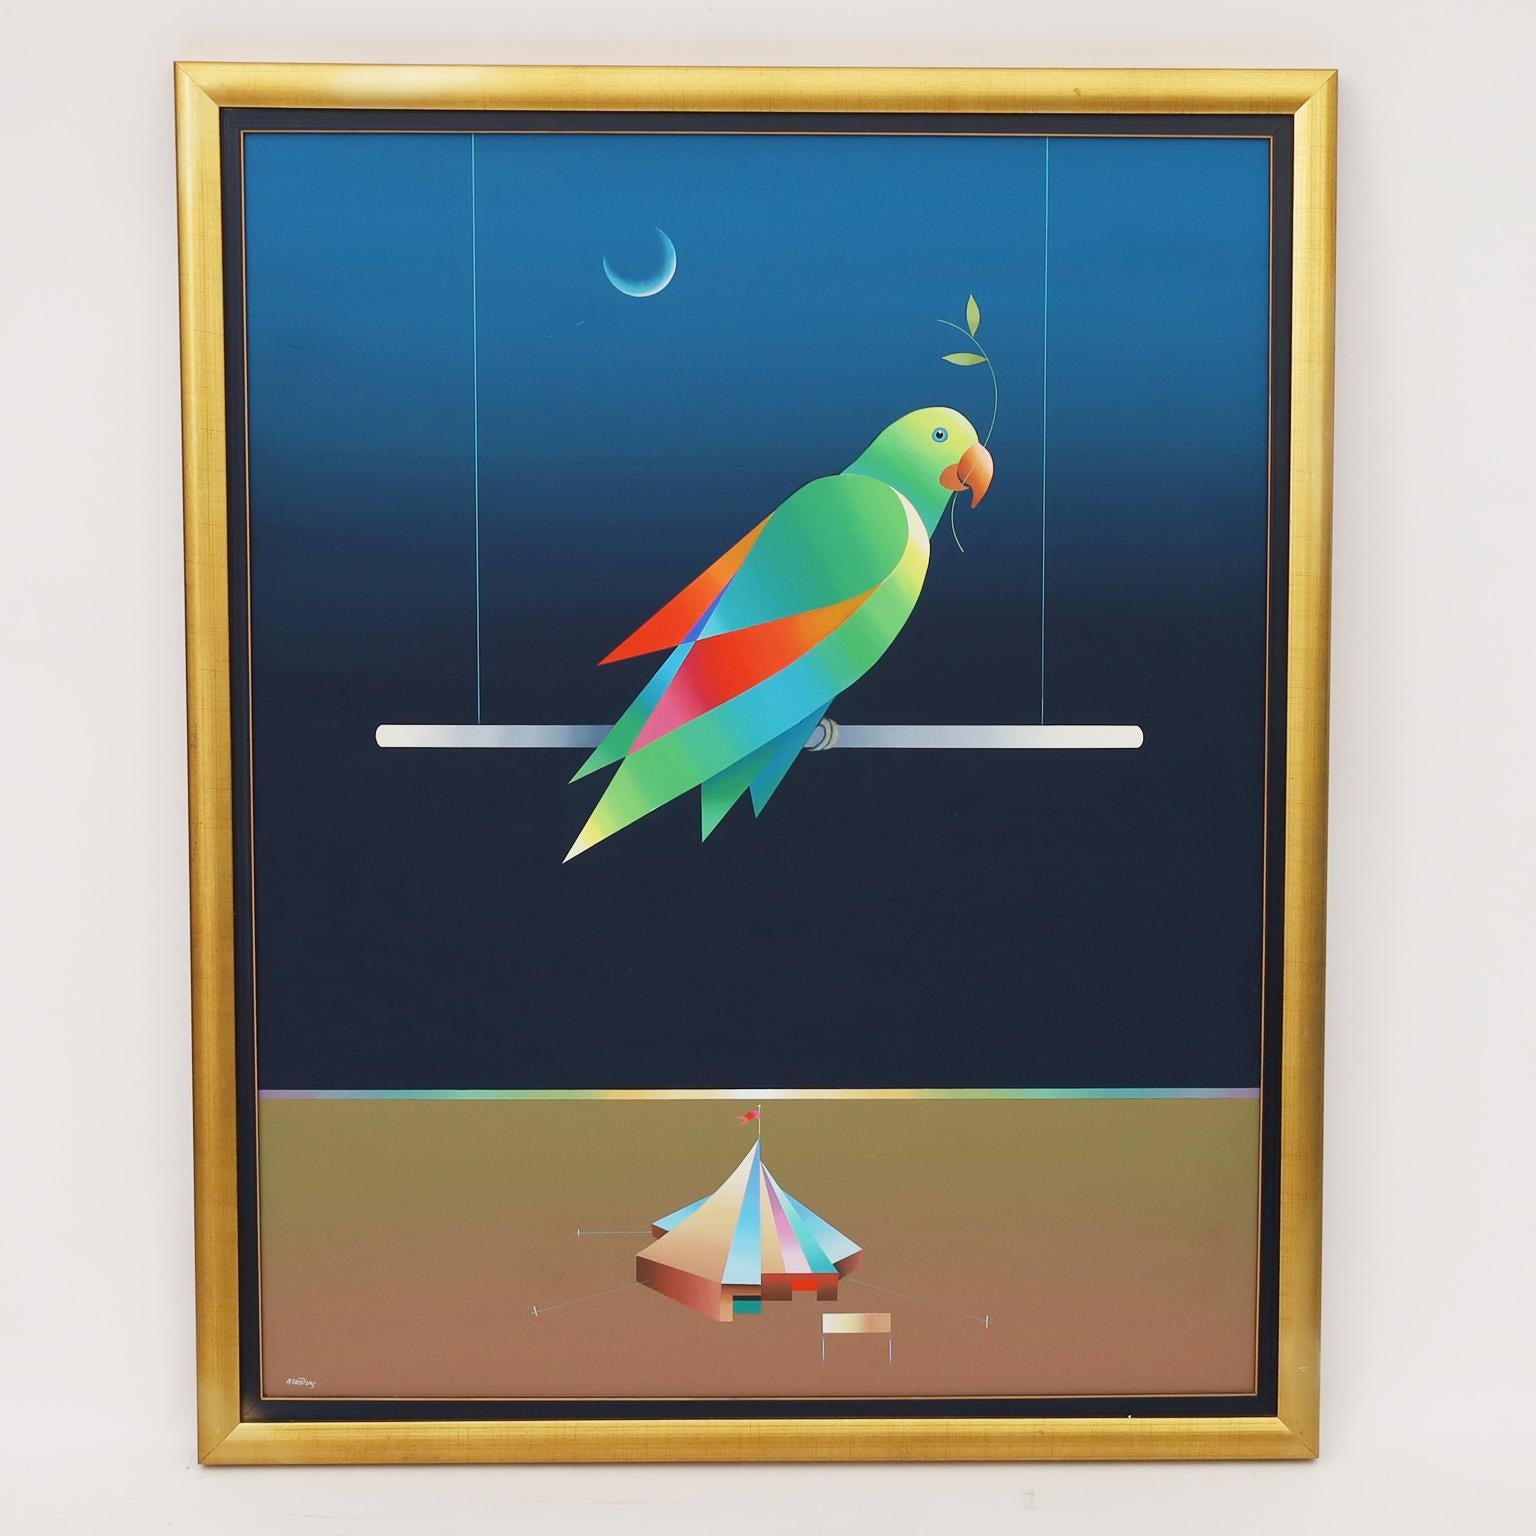 Three dazzling oil paintings on canvas, one of a parrot on a trapeze under a crescent moon and over a distant circus tent, one of a magical dove on a trapeze with flags under a full moon, and one of a bird on a cage under the crescent moon. All